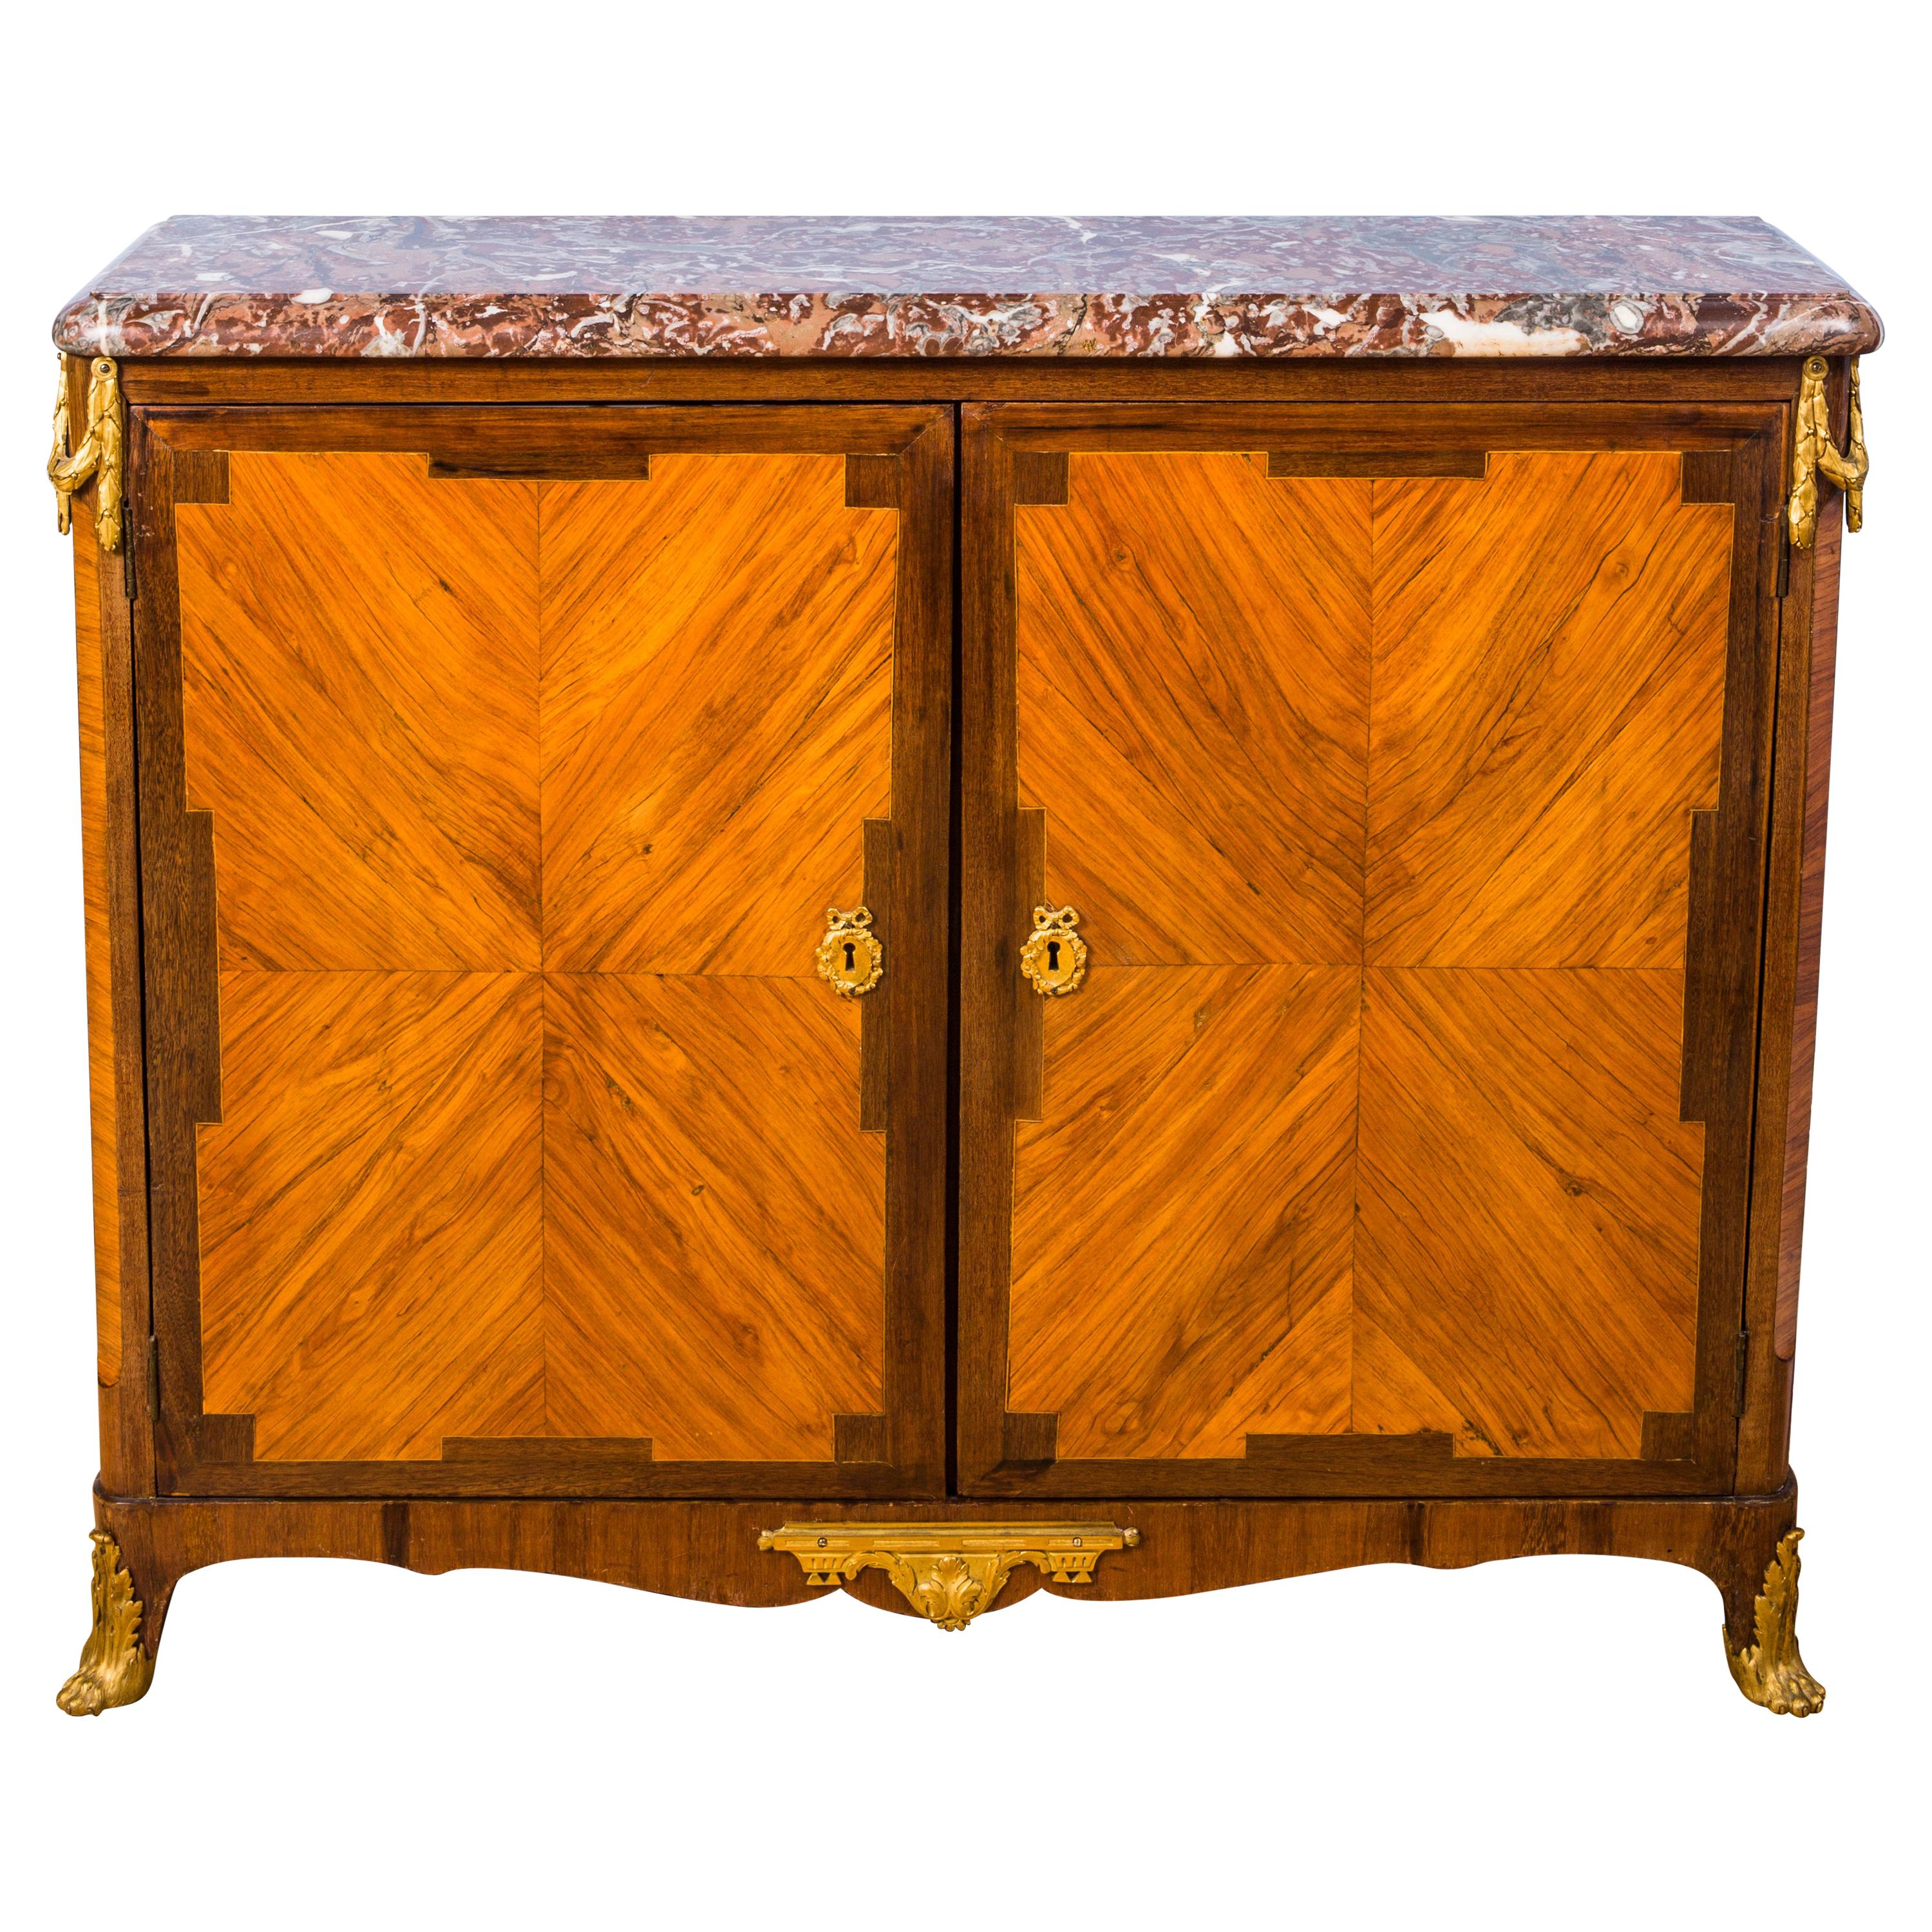 Gilt Bronze Mounted Cabinet with Marble Top by Pierre Roussel, Paris, circa 1745 For Sale